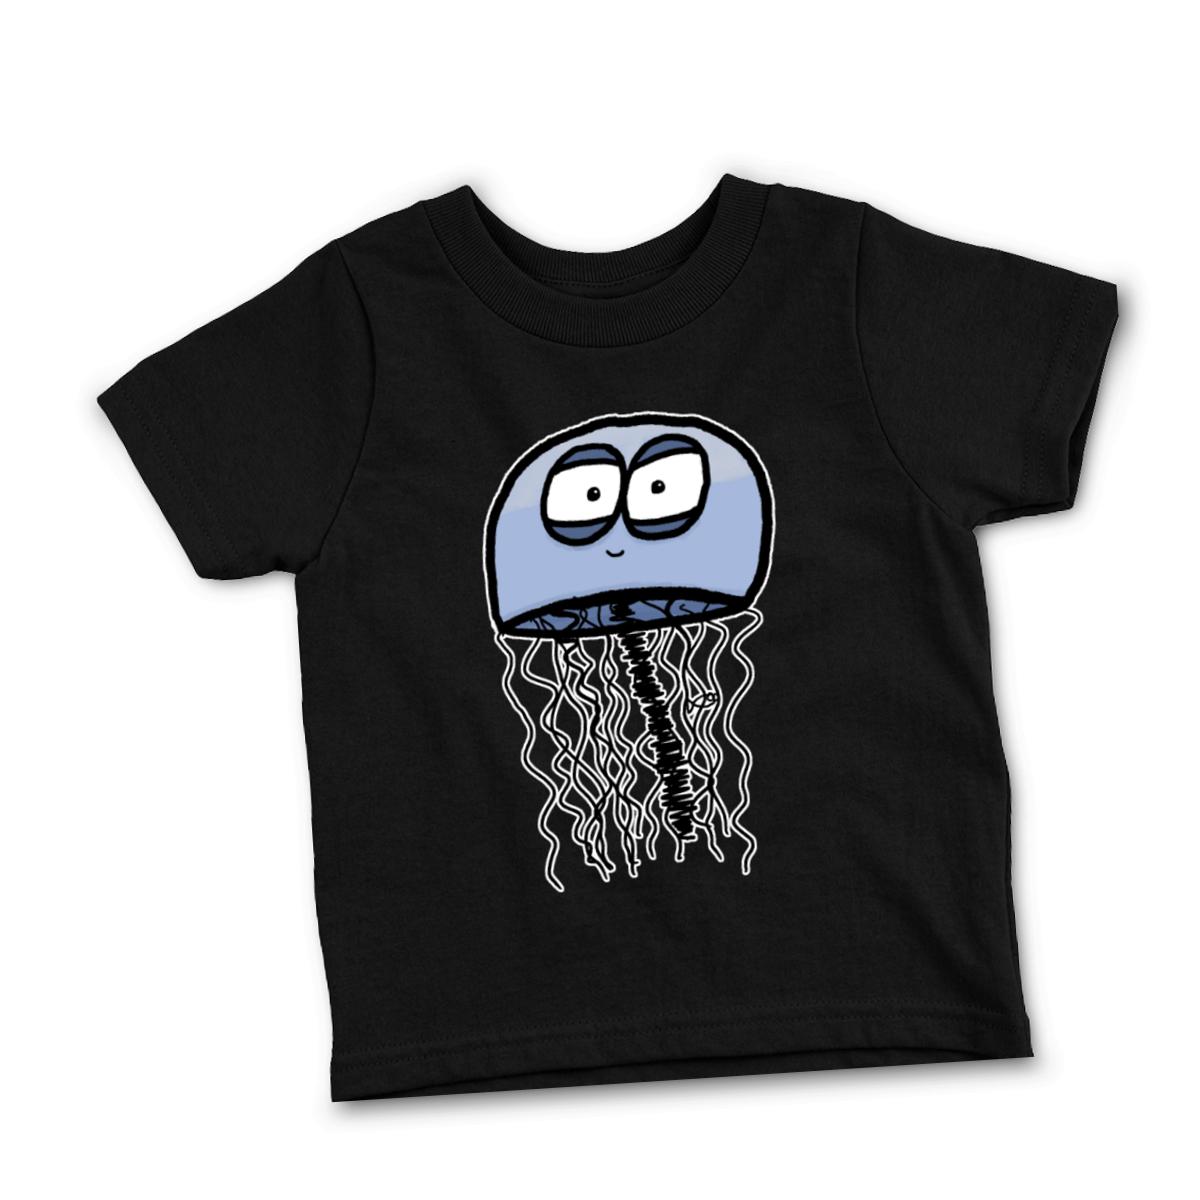 Jelly Fish Toddler Tee 56T black